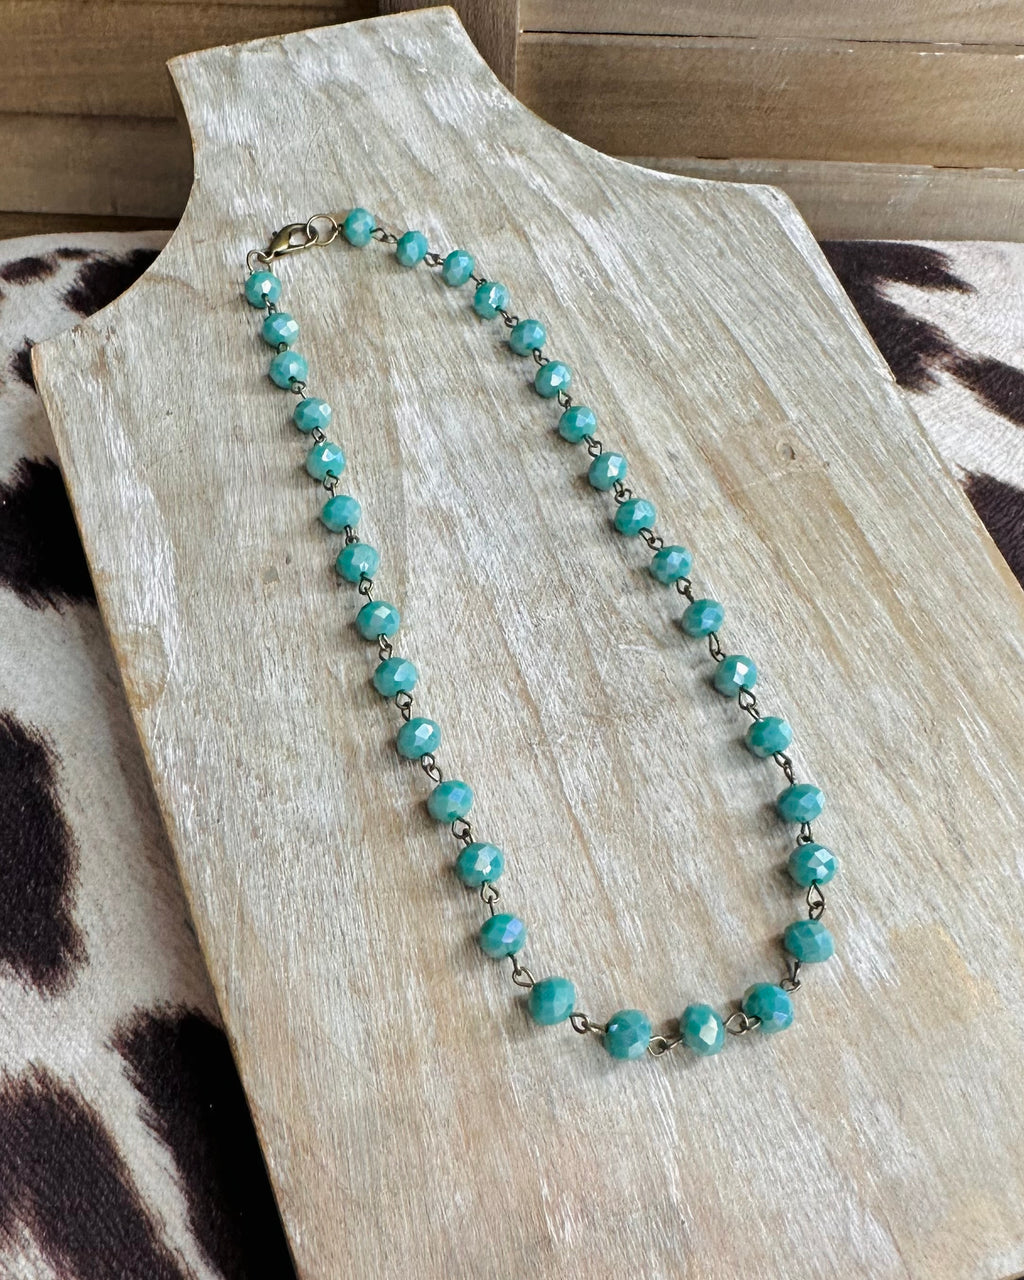 Beaded Choker Necklace *Turquoise